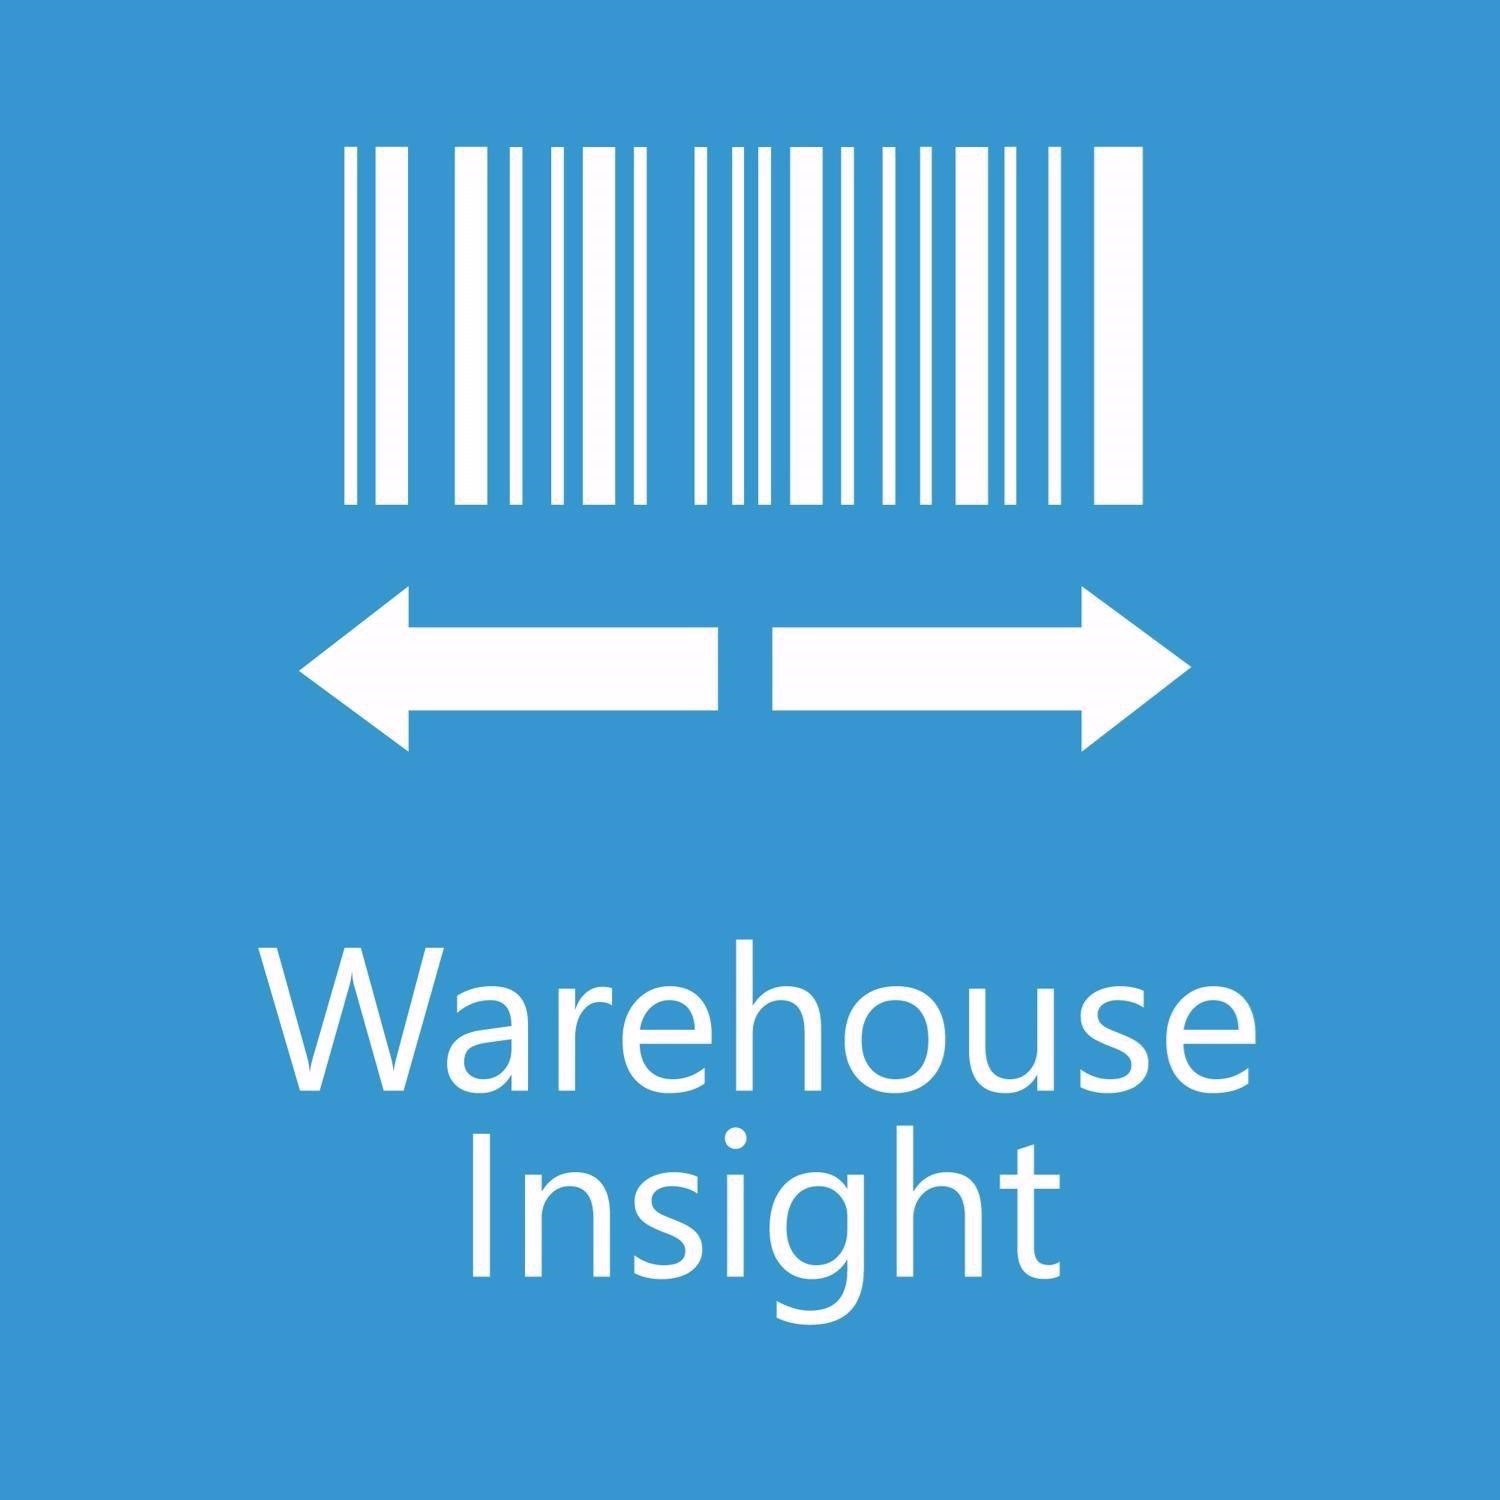 Insight works | Warehouse Insight - Implementation